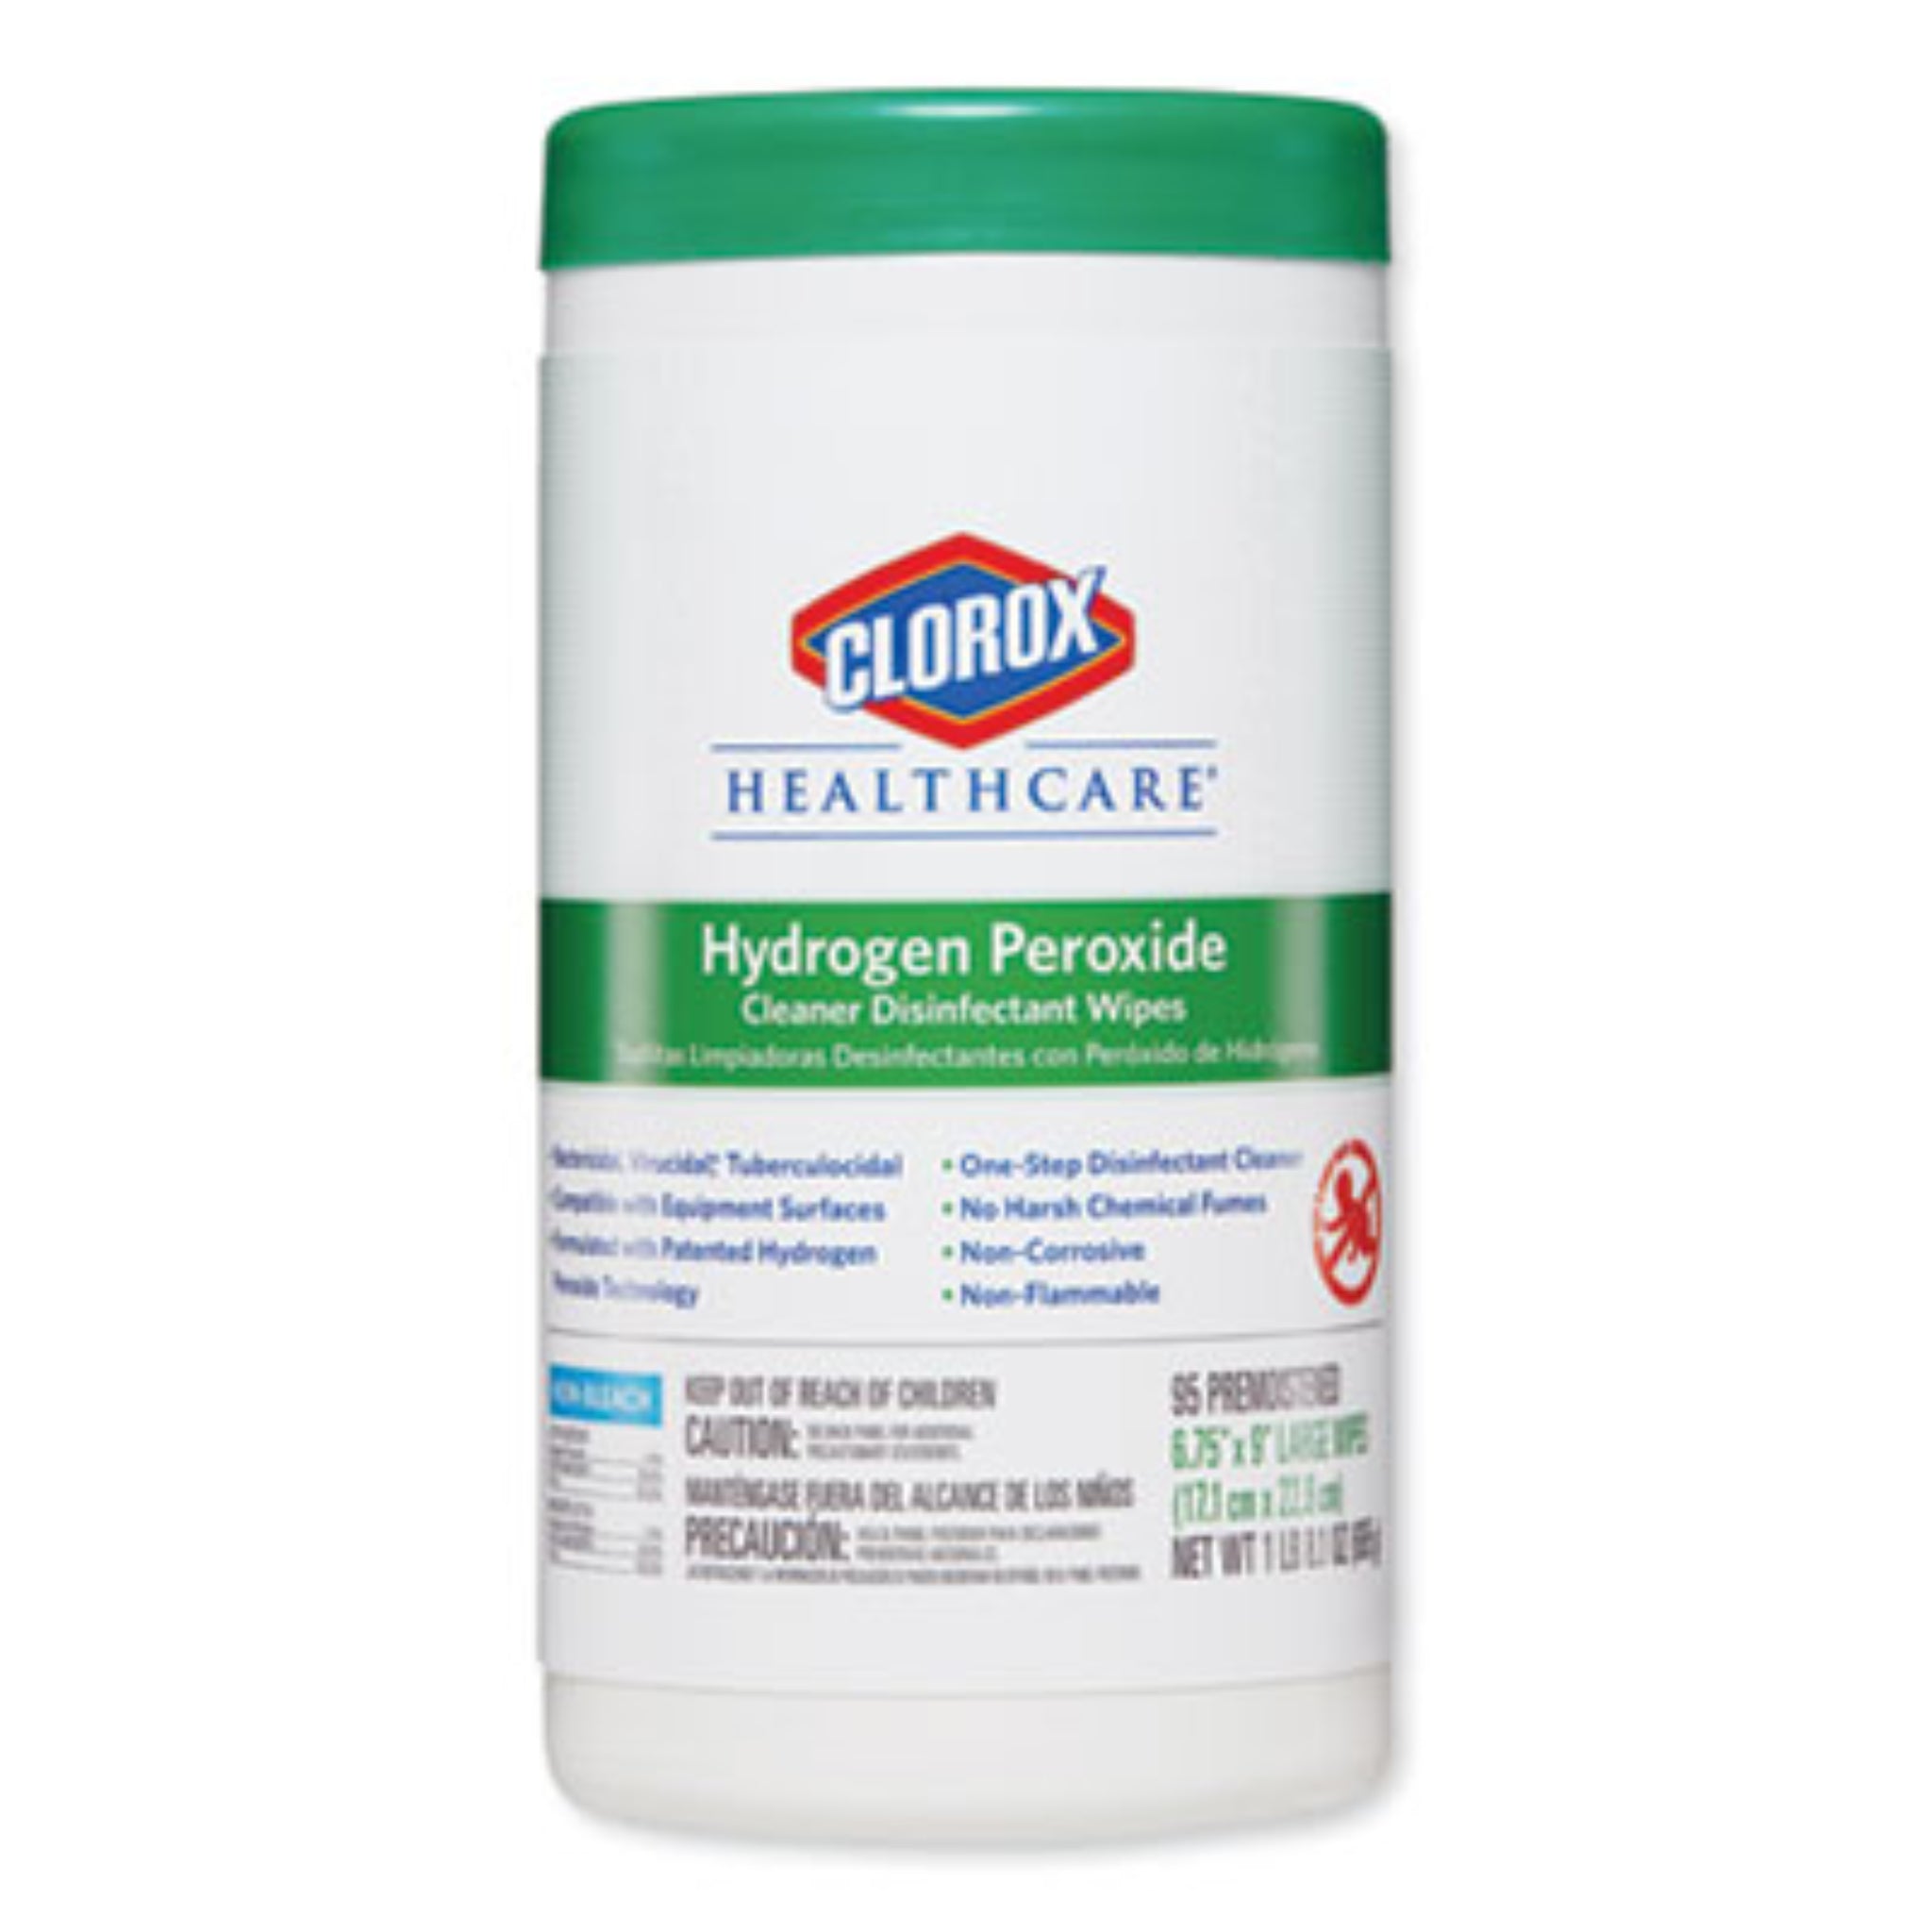 CLOROX SALES CO. CLO30824 Hydrogen Peroxide Cleaner Disinfectant Wipes, Front View